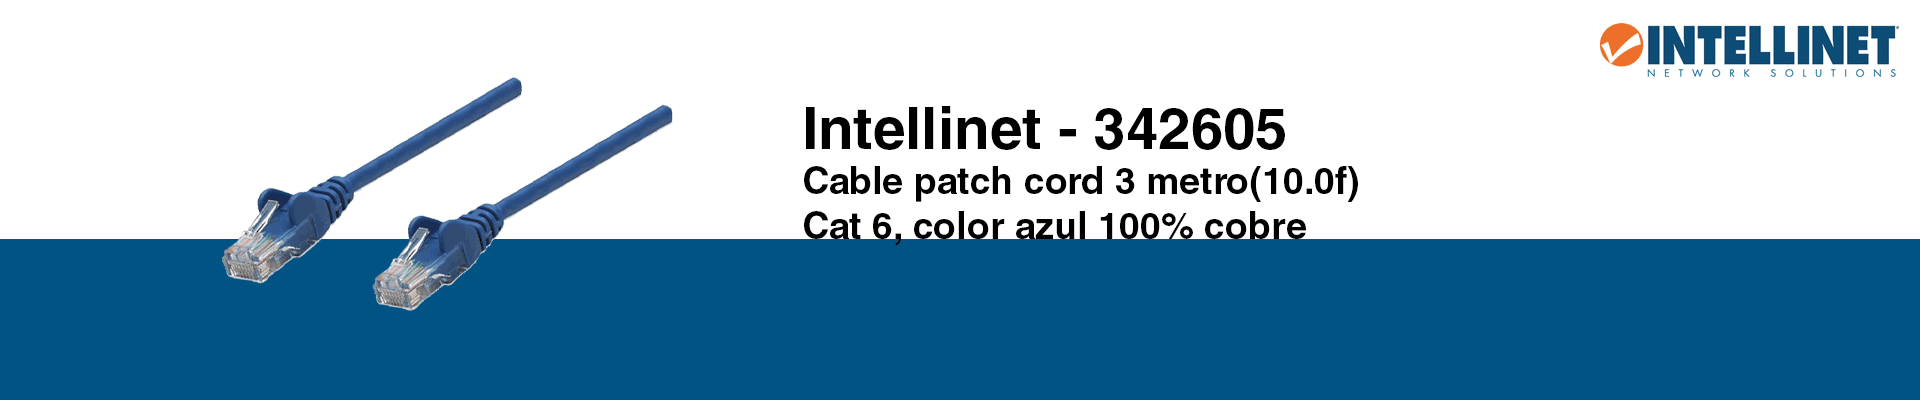 Cable-Patch-Cord-3-Metros-Cat-6-UTP-Azul-Intellinet-342605-3